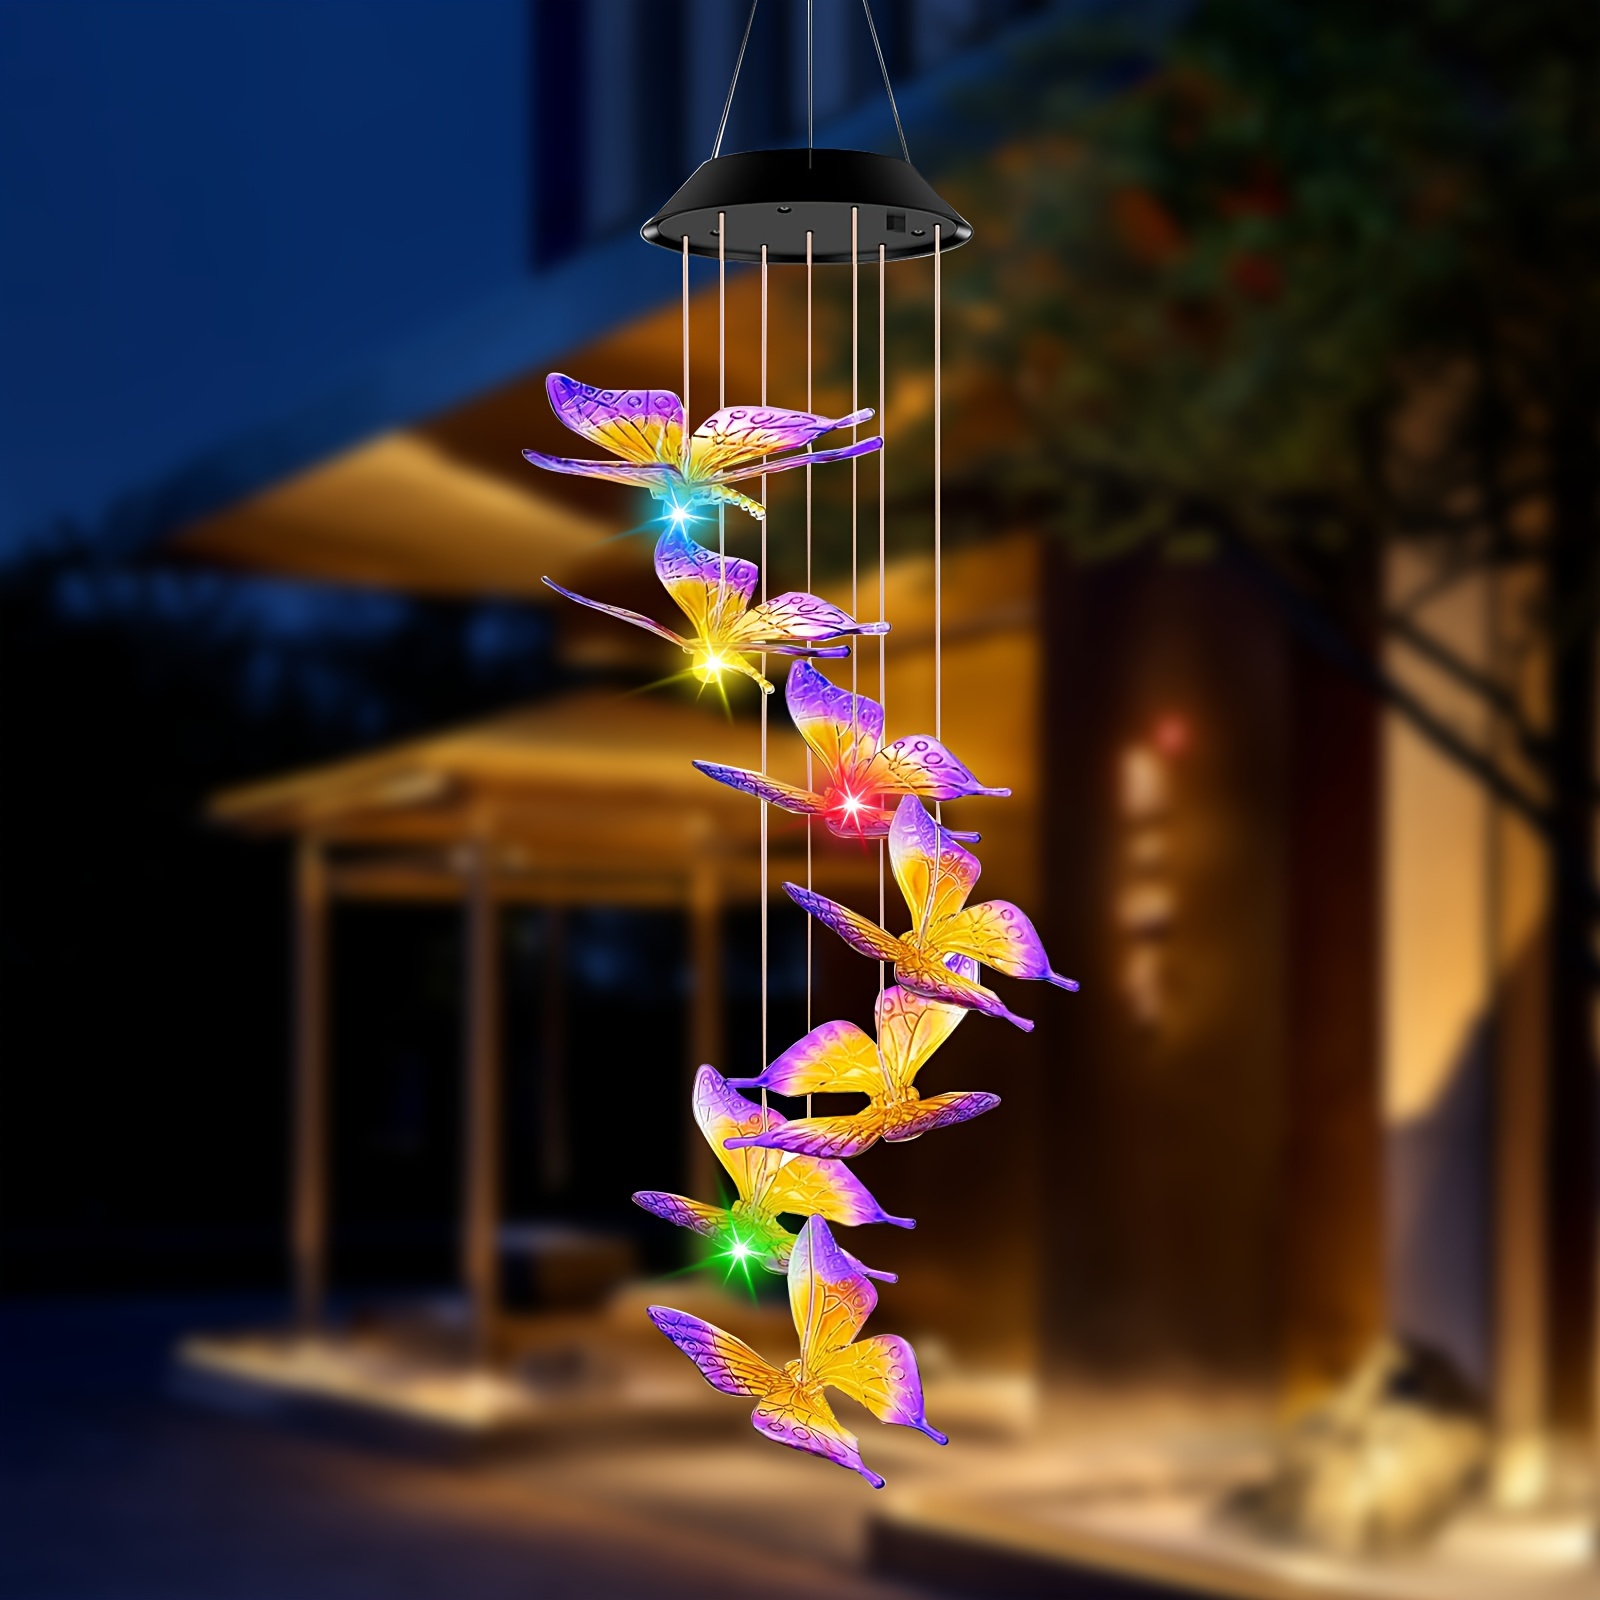 LED Wind Chime Light Sea Glass for Crafts with Holes for Wind Chimes Decor Dreamcatcher Wall Hanging Car Feathers Home Handmade Flower Room Home Decor